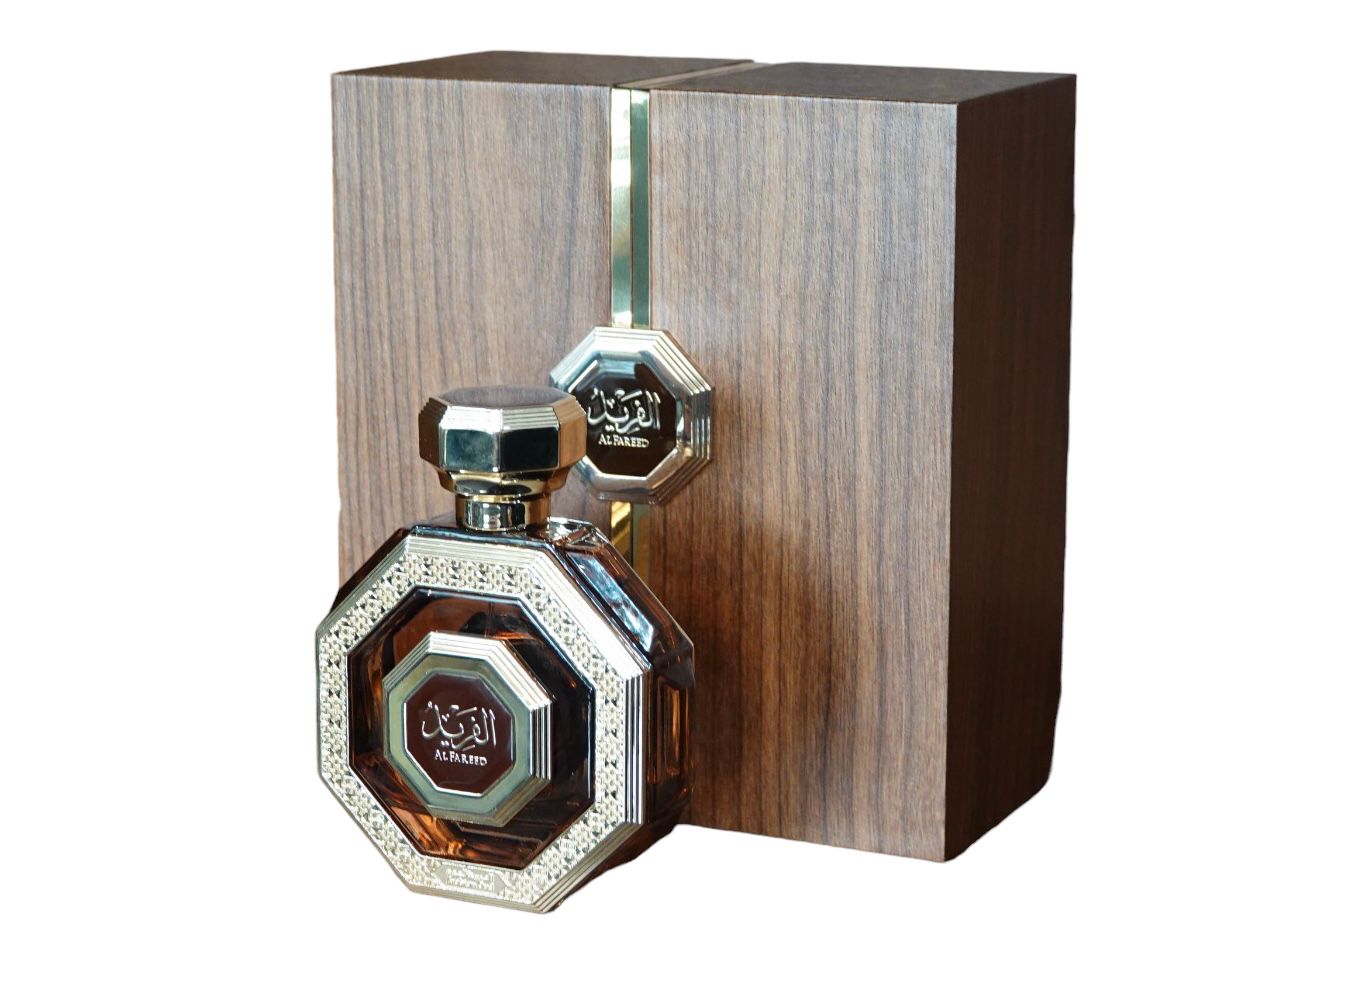 An intricately designed octagonal perfume bottle with a reflective silver cap, placed next to a wooden textured box that has a metallic strip running vertically down the center. Both the bottle and the box bear the label "Al Fareed" in Arabic calligraphy, suggesting it's a luxurious Arabian oud fragrance product. The overall presentation is rich and traditional.